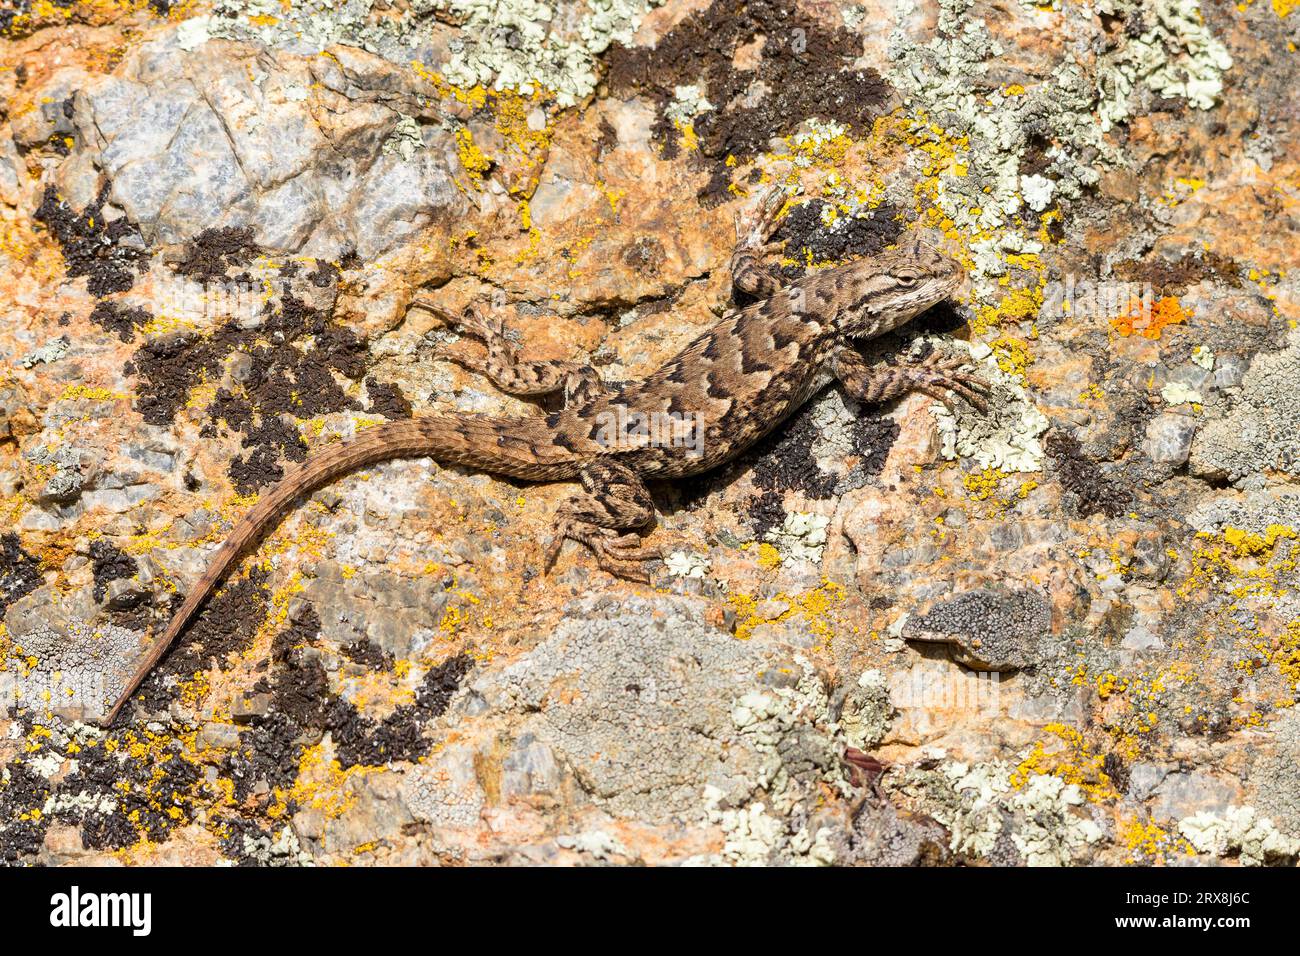 A Common Sagebrush Lizard blends in against a lichen-covered rock. Stock Photo